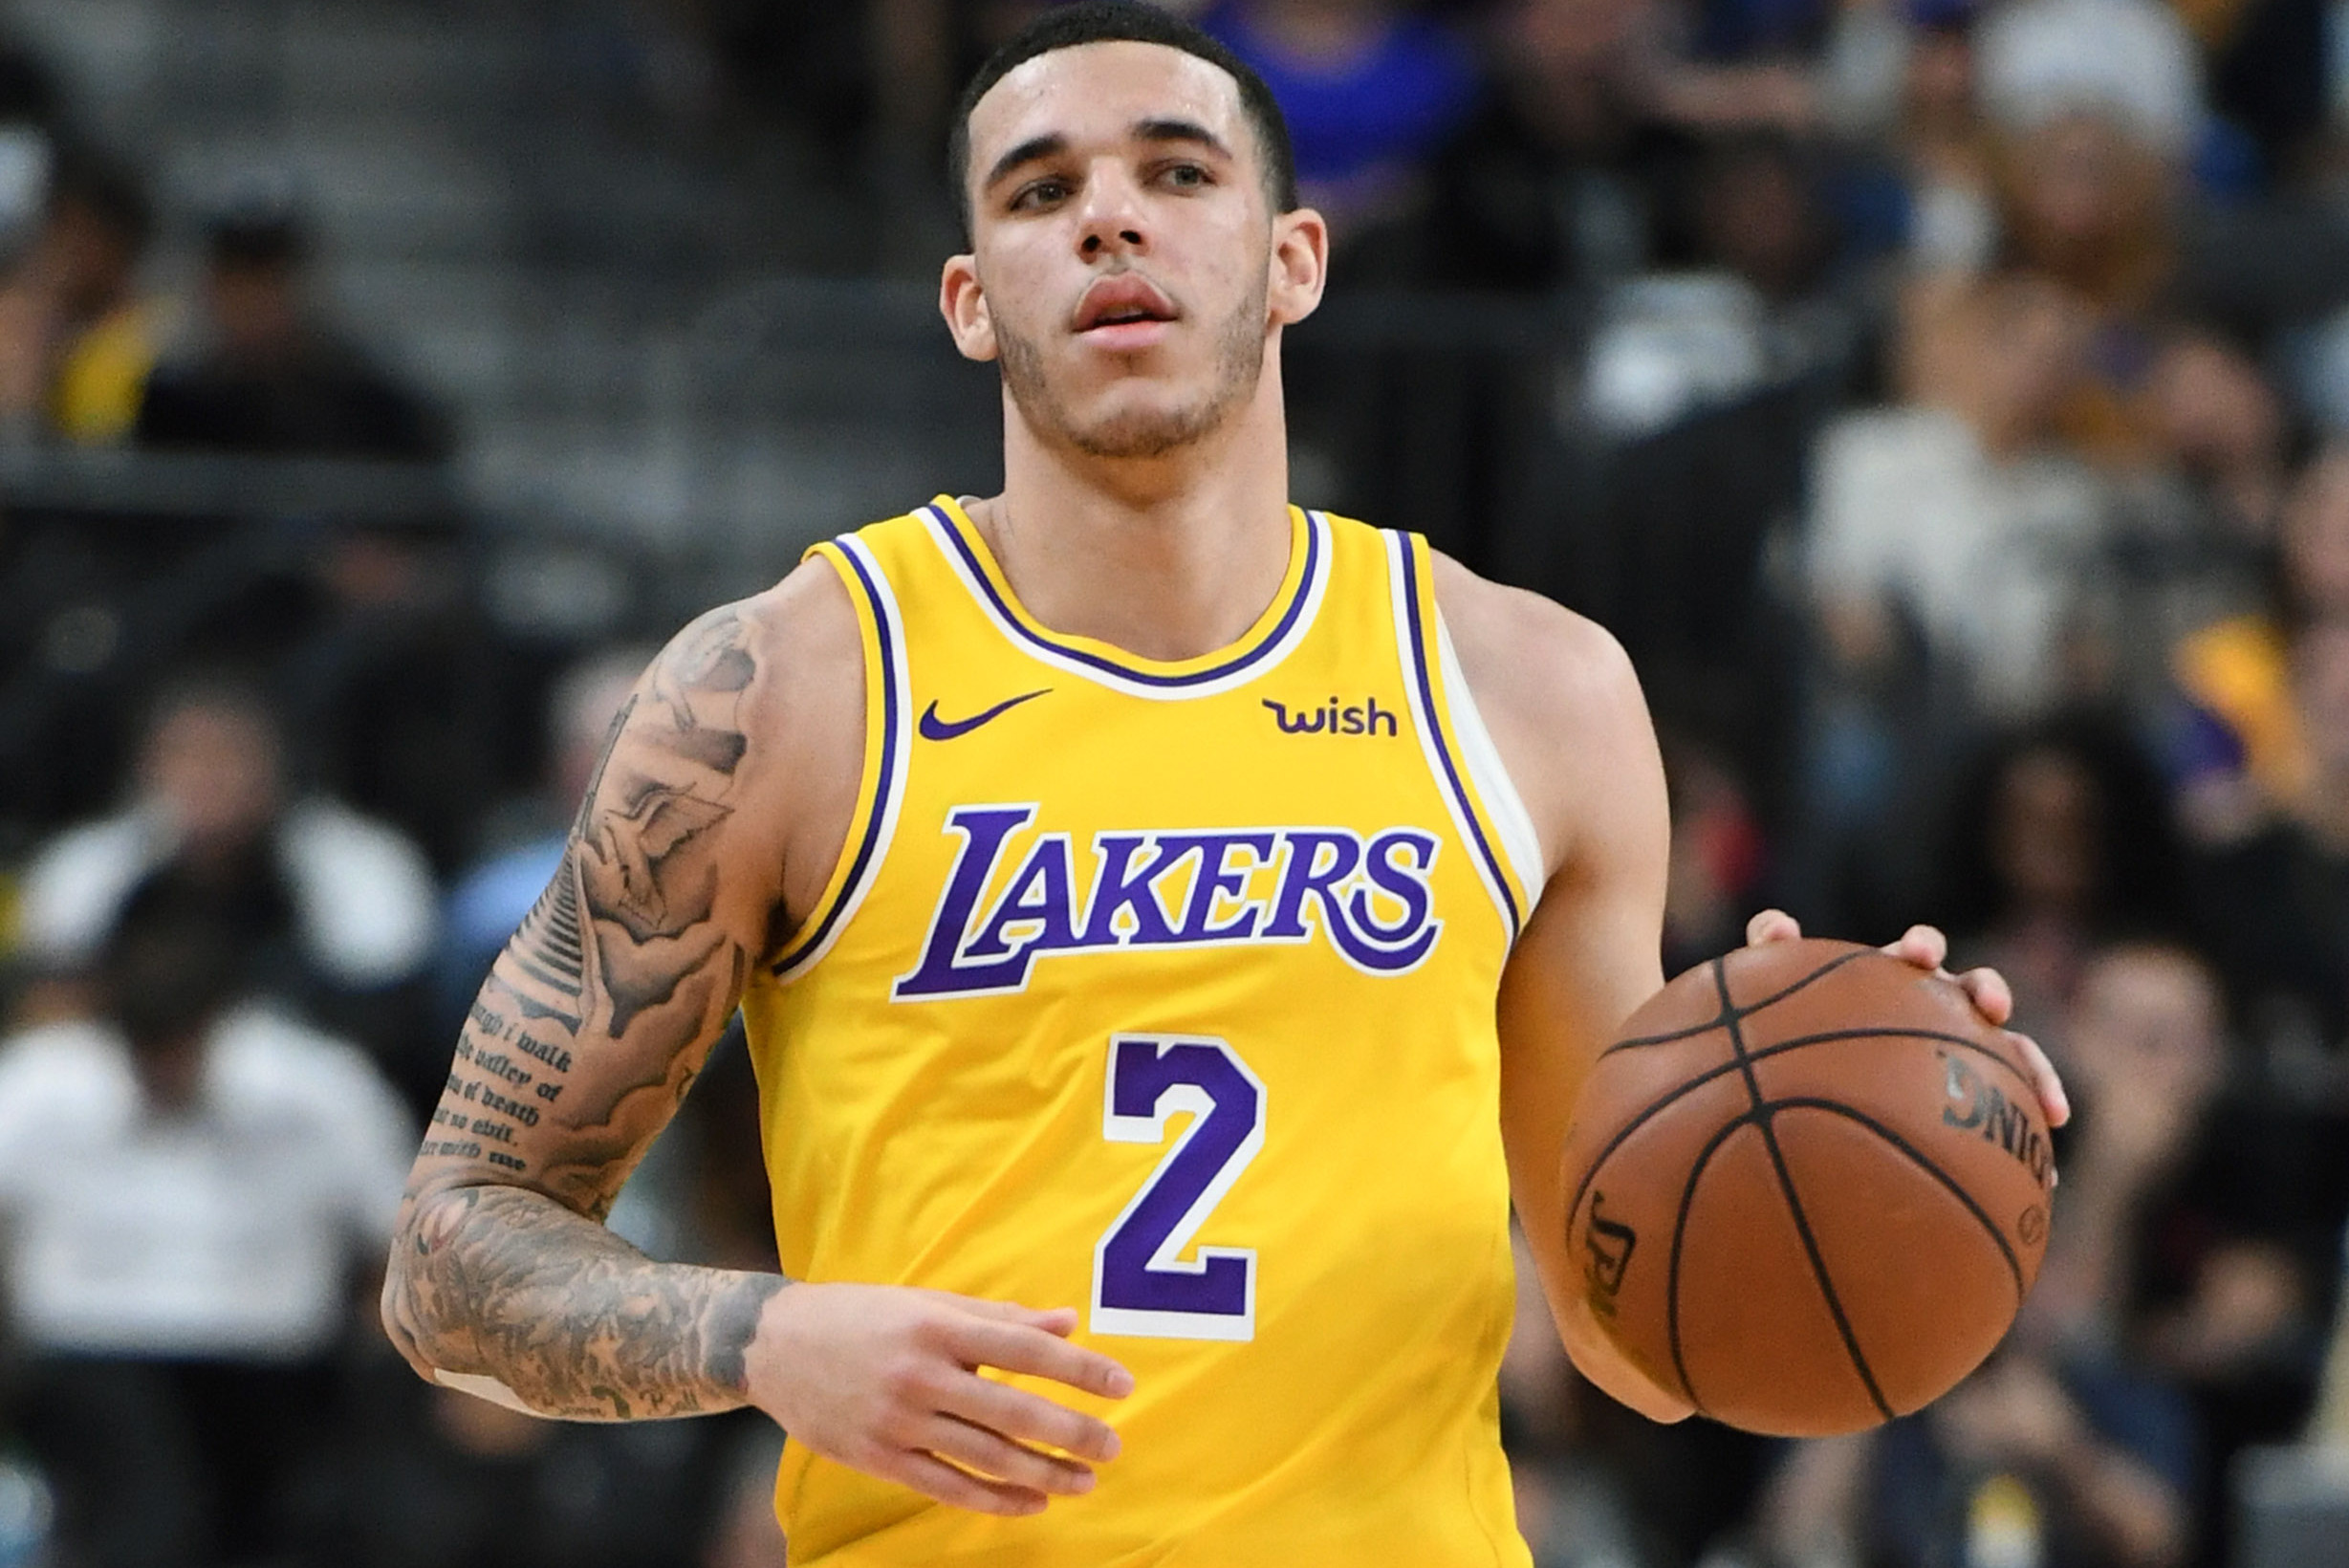 LOOK: Lonzo Ball has his own wall at Los Angeles Lakers team store